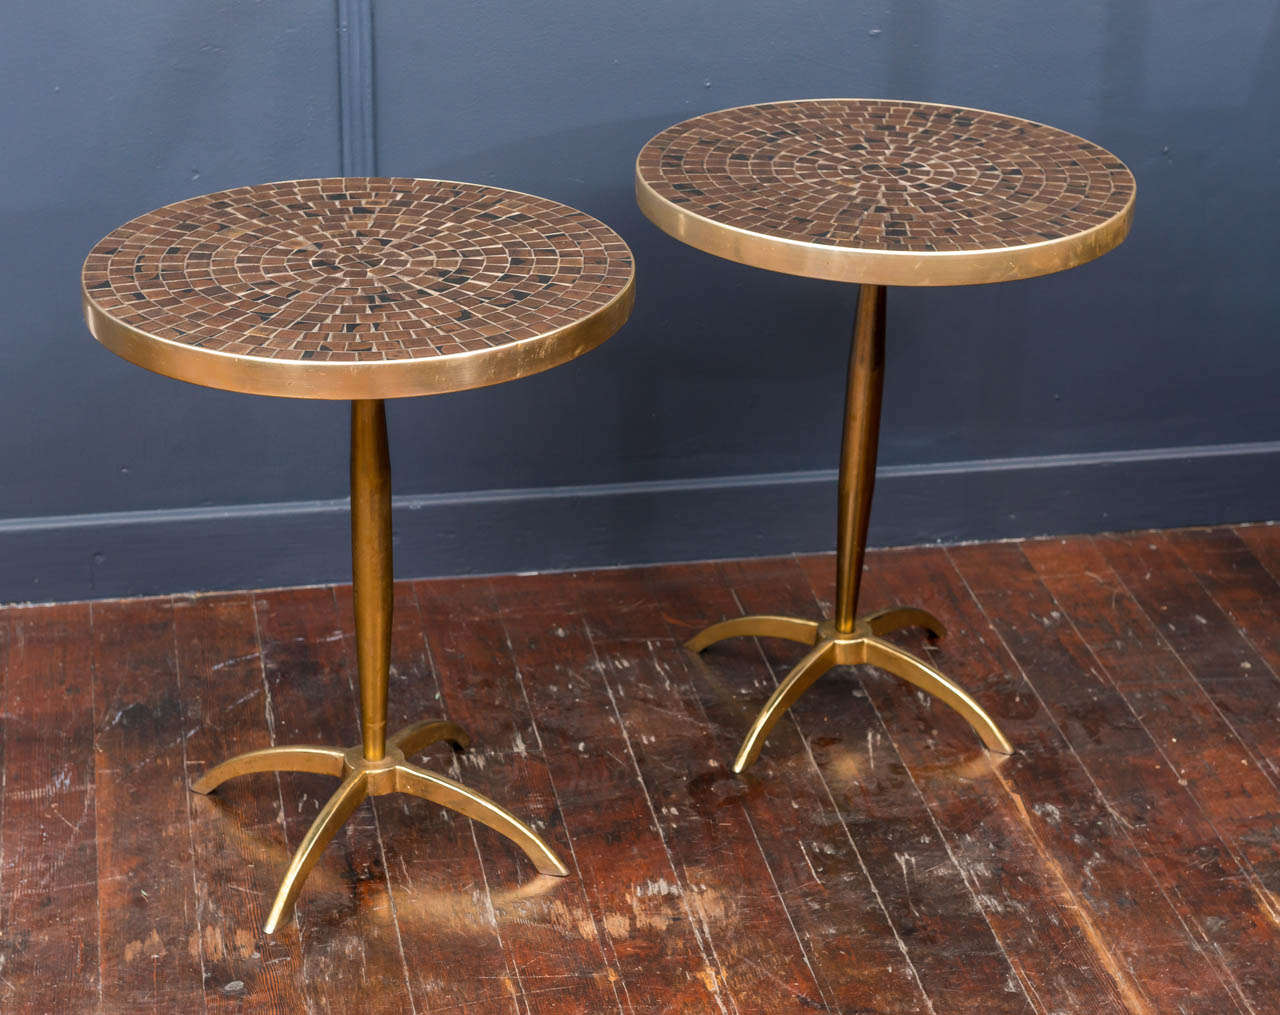 Chic matching pair of Italian tile top and brass side tables. Tops have matching starburst pattern inlay and are an original pair.